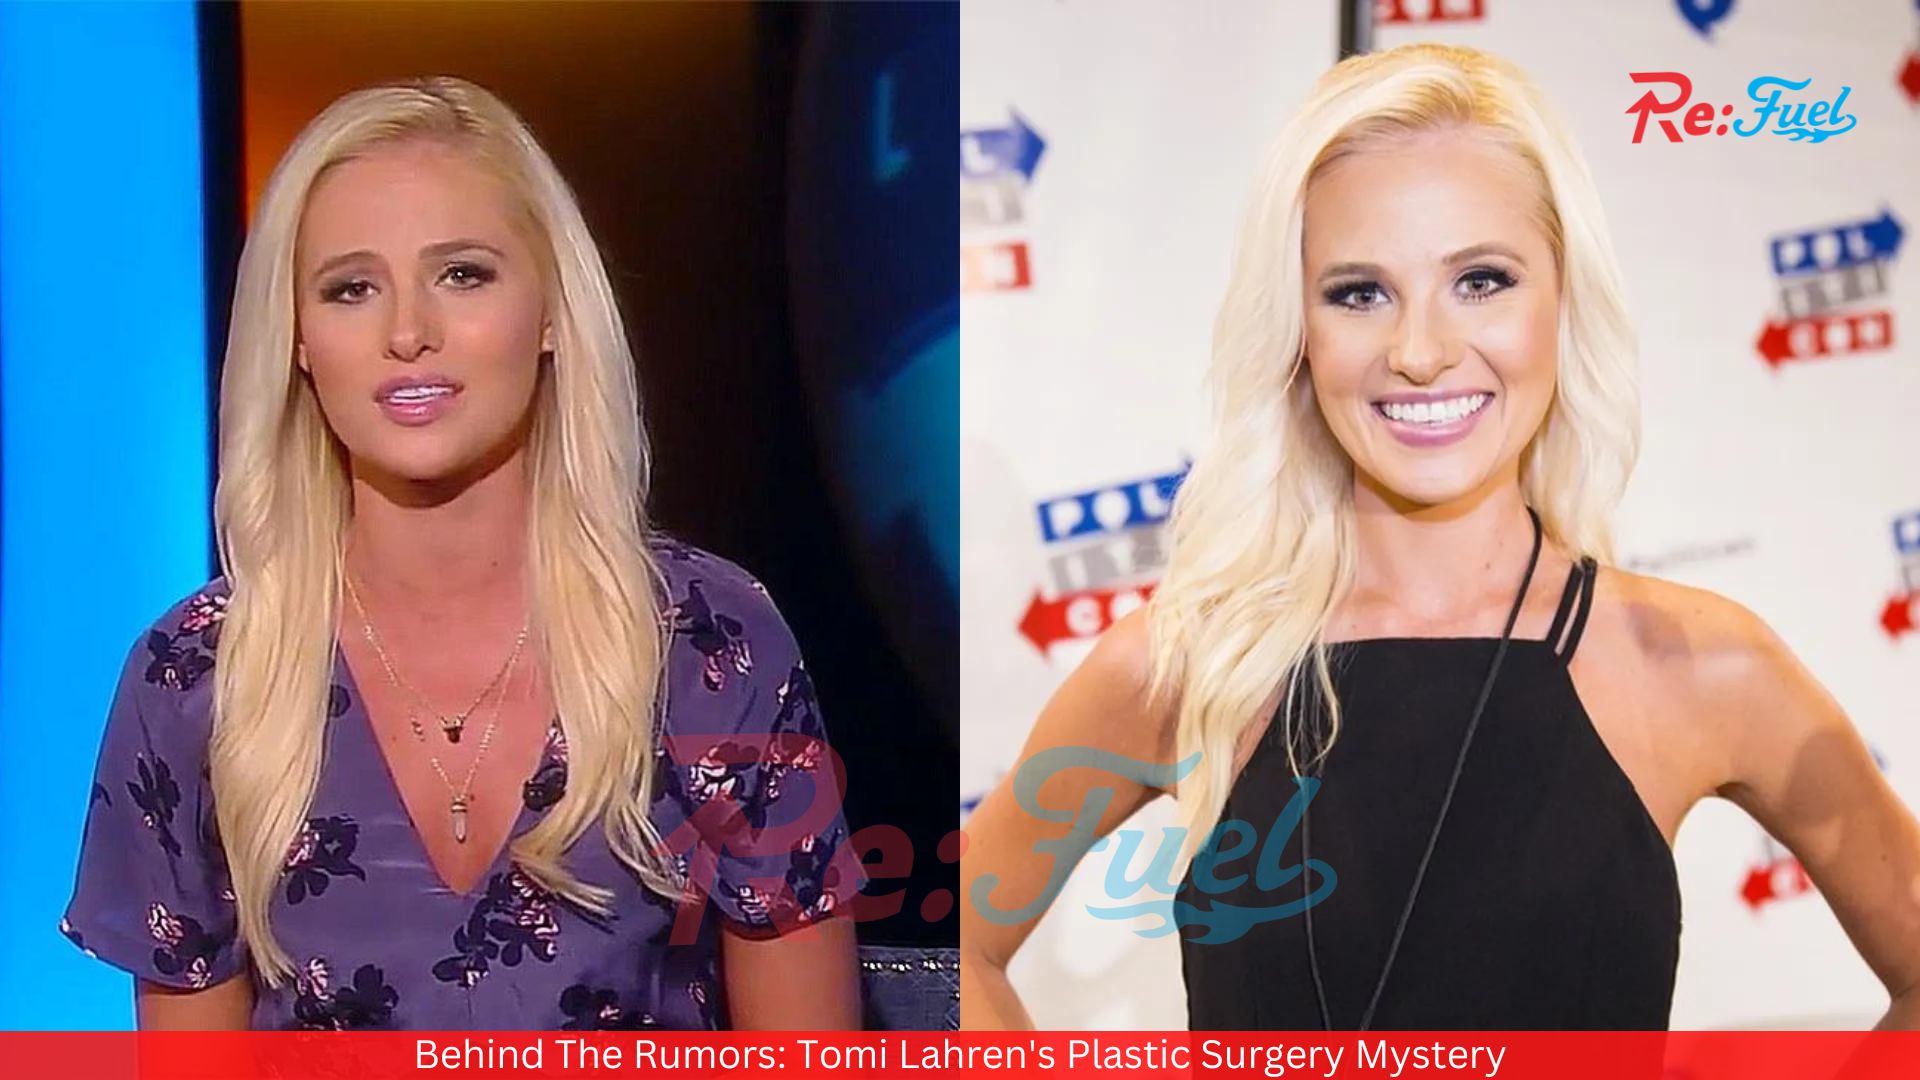 Behind The Rumors: Tomi Lahren's Plastic Surgery Mystery